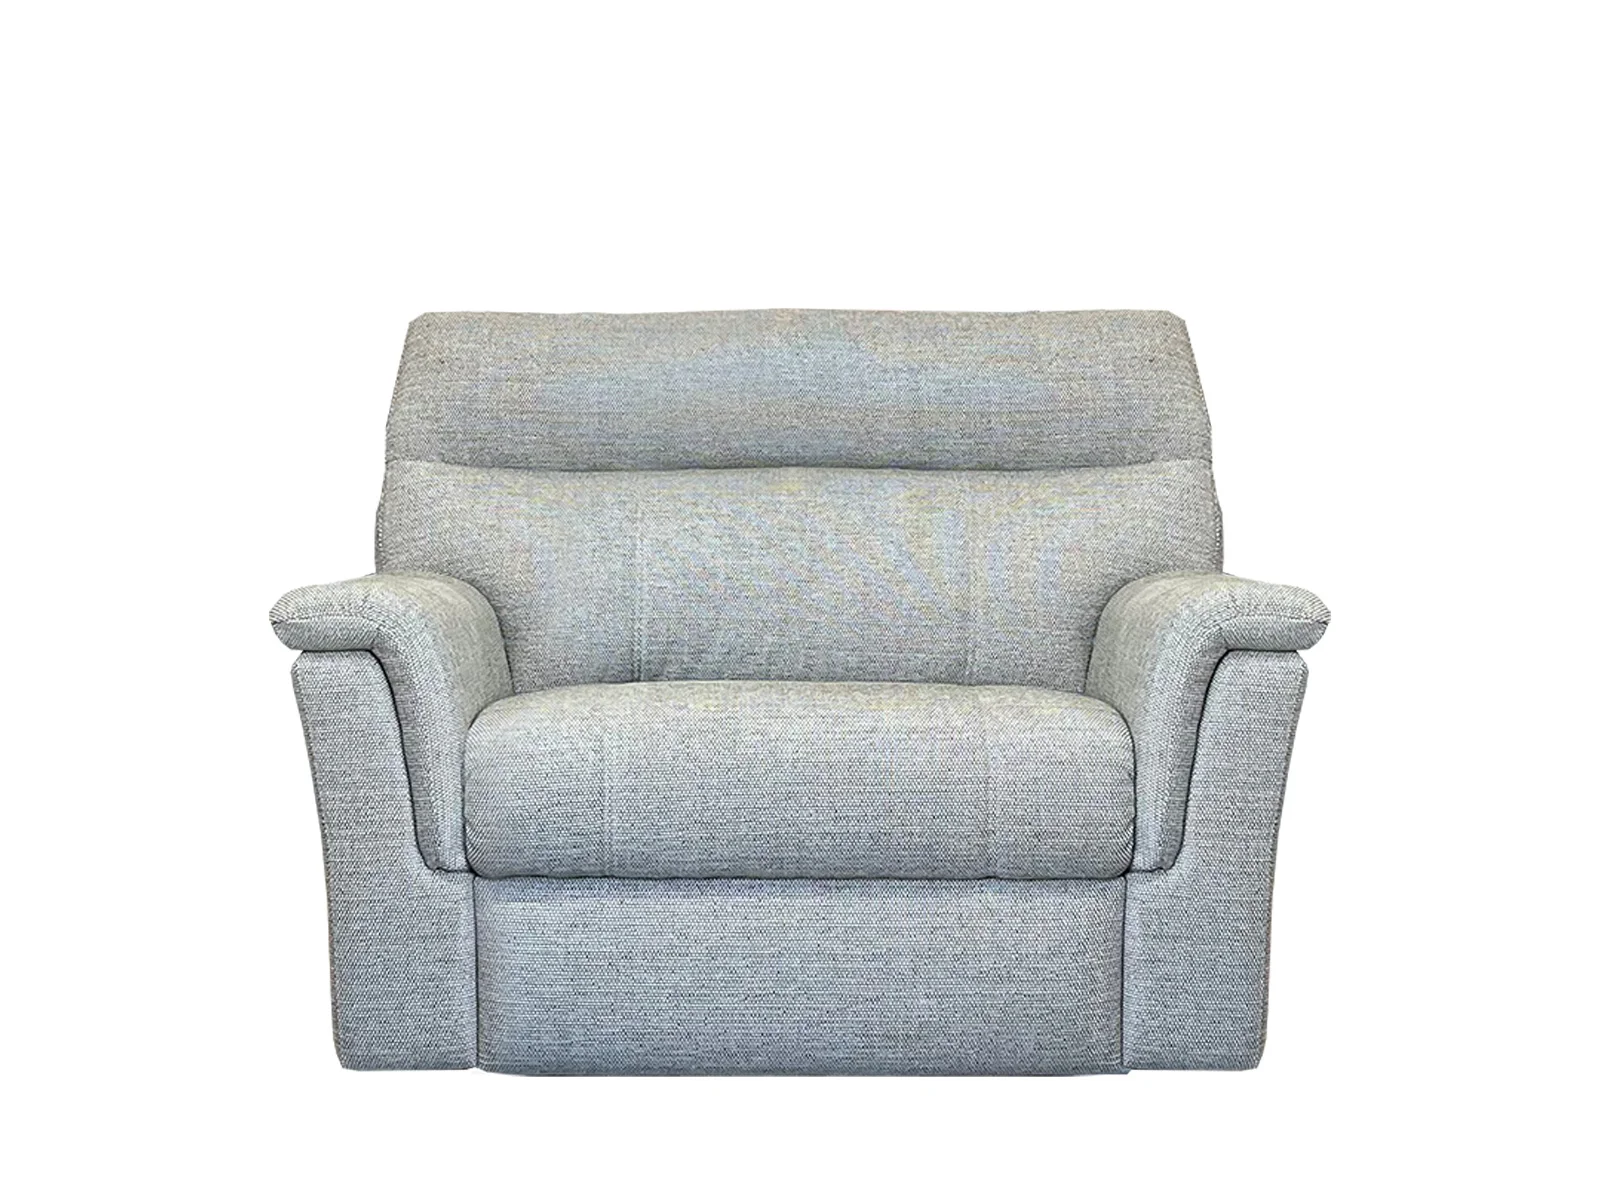 Power Recliner Cuddler Chair With Adjustable Headrest And Lumbar Support